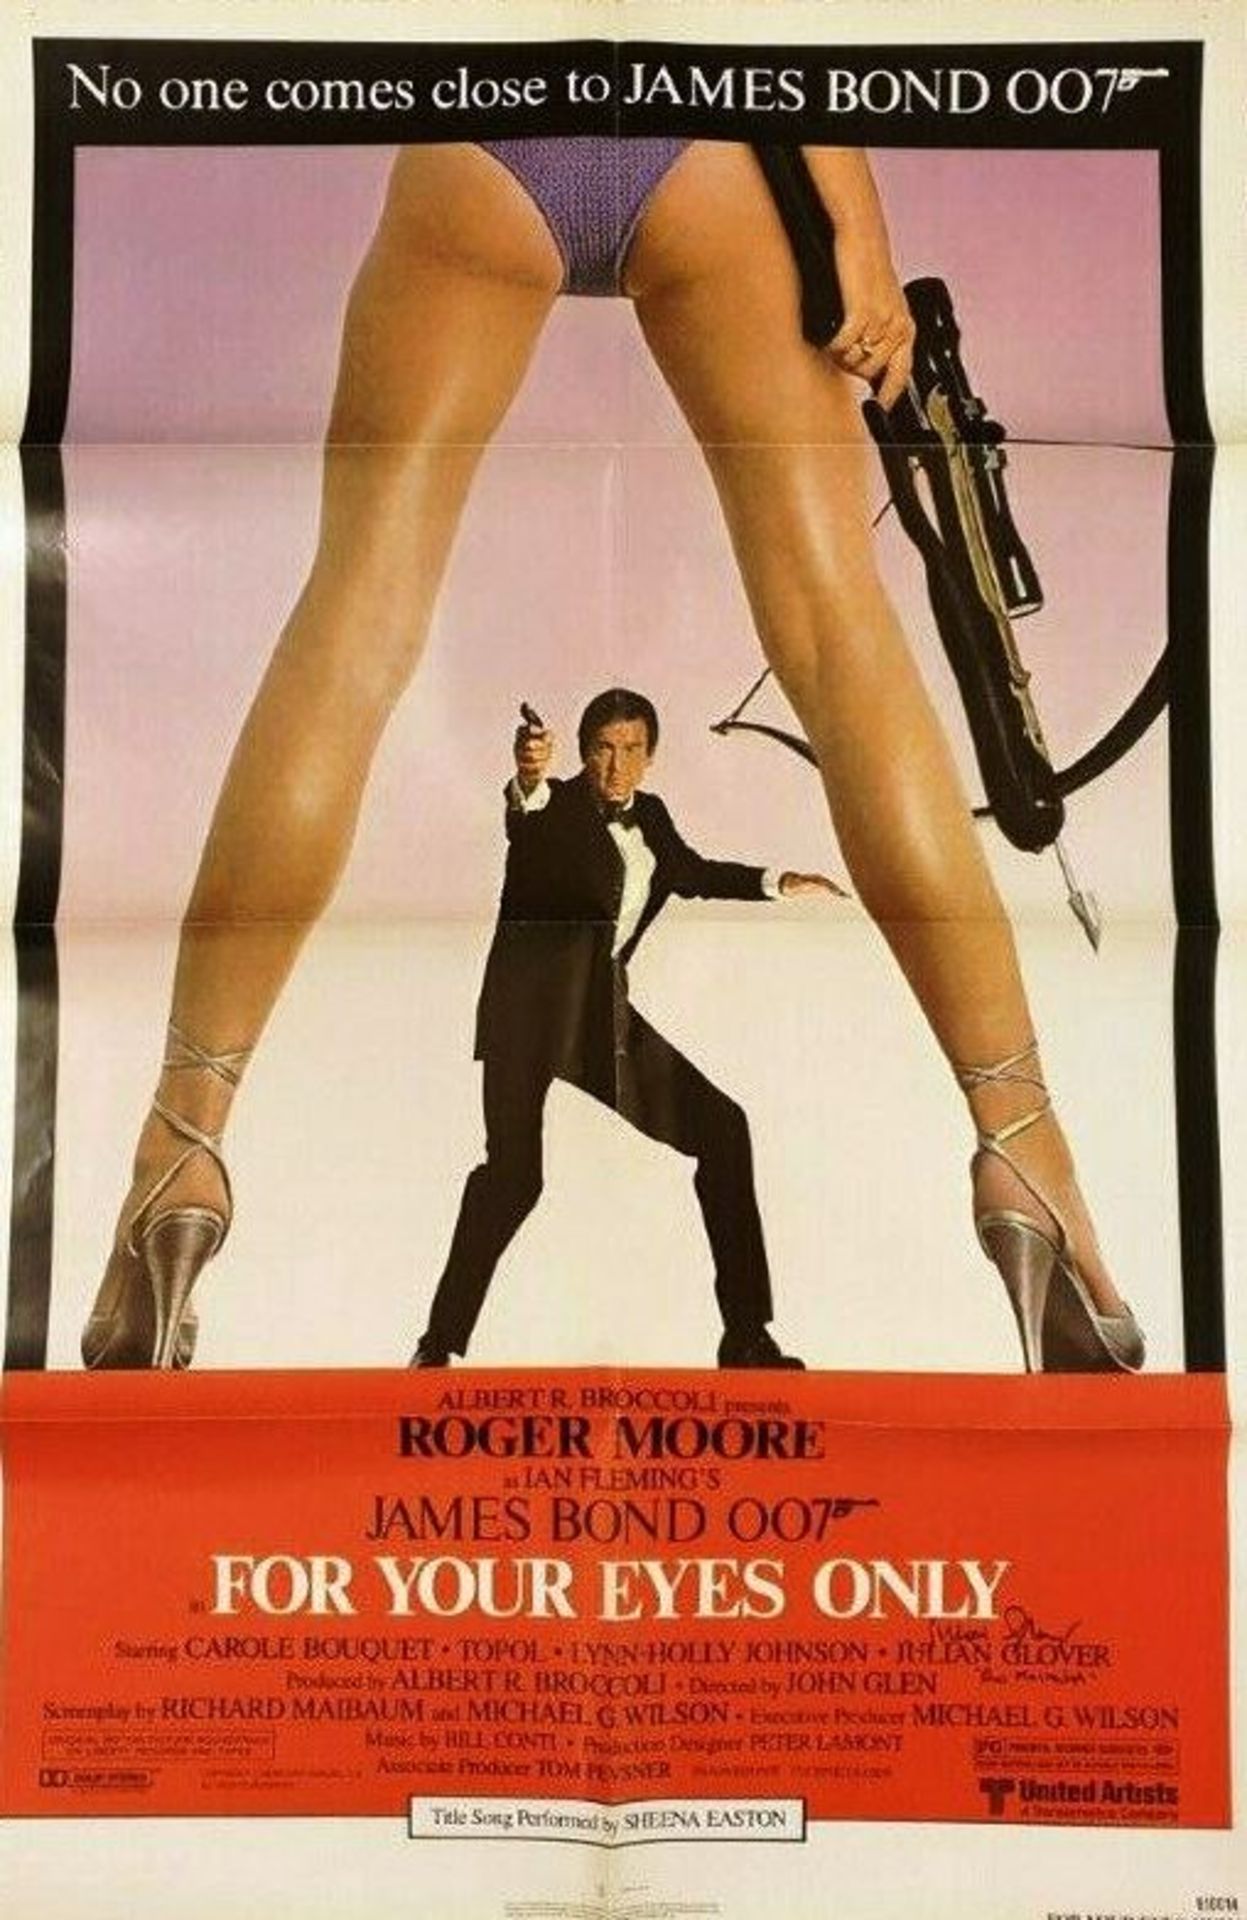 JAMES BOND FOR YOUR EYES ONLY - US ONE SHEET POSTER